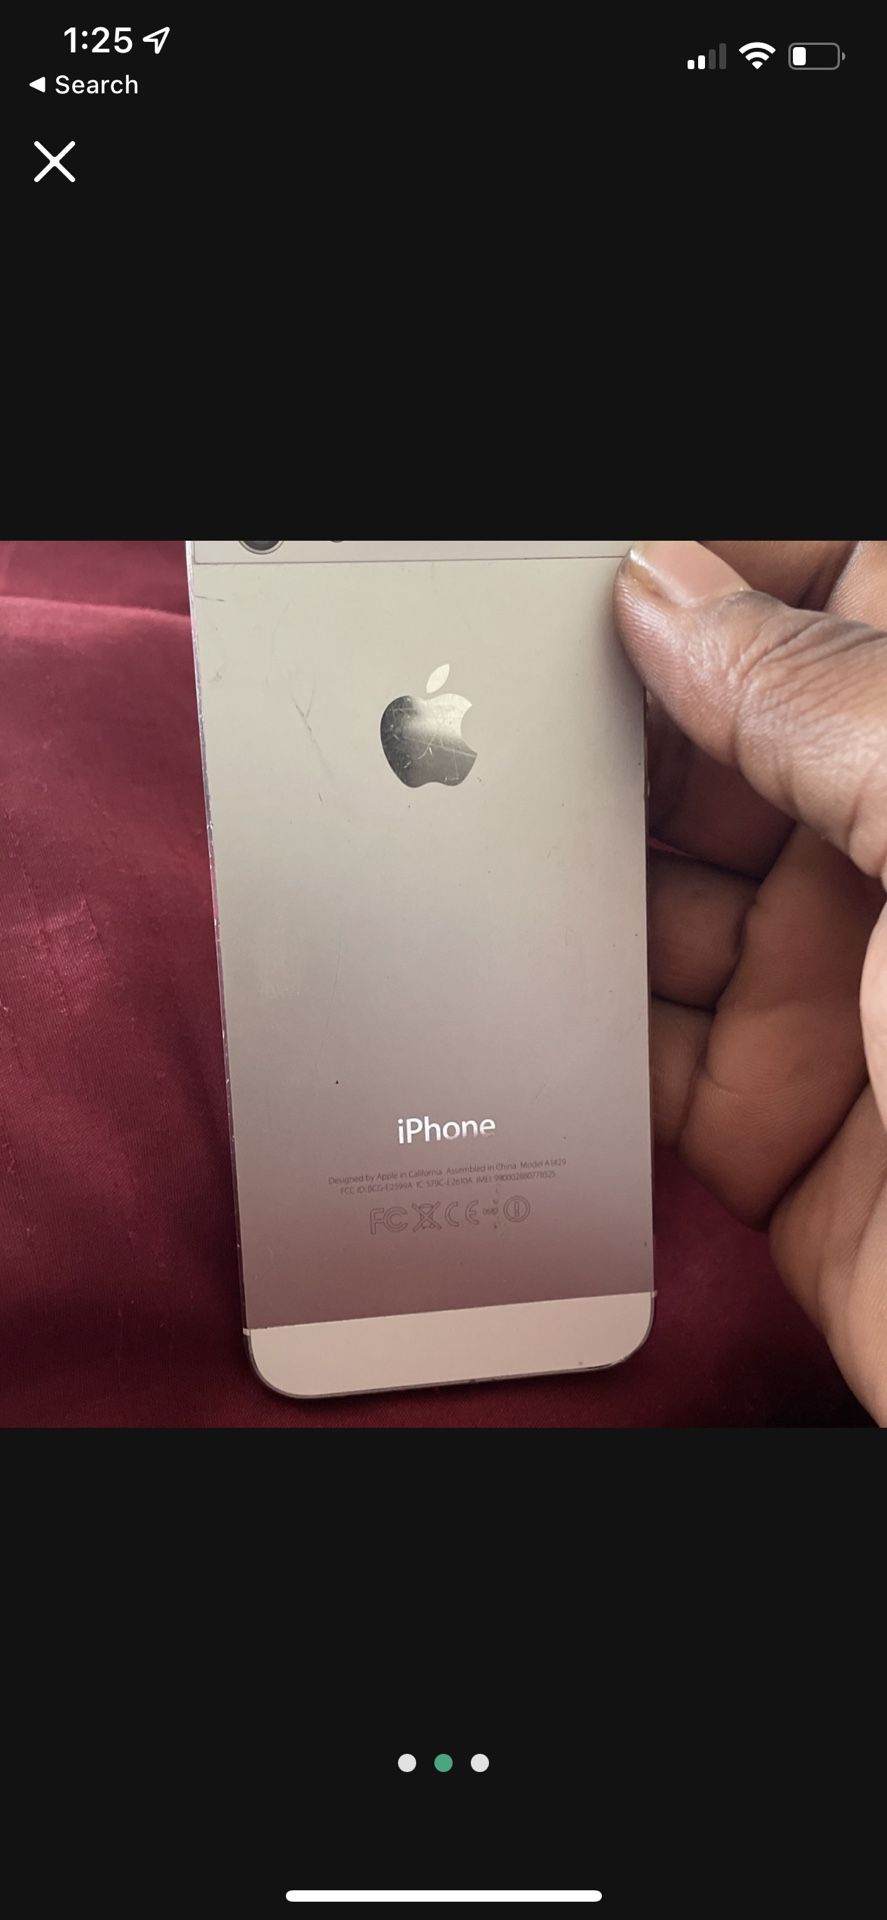 $60 Bucks iPhone 5 Steal . Add Extra 40 And Ill Throw Some Airpods I’m There 